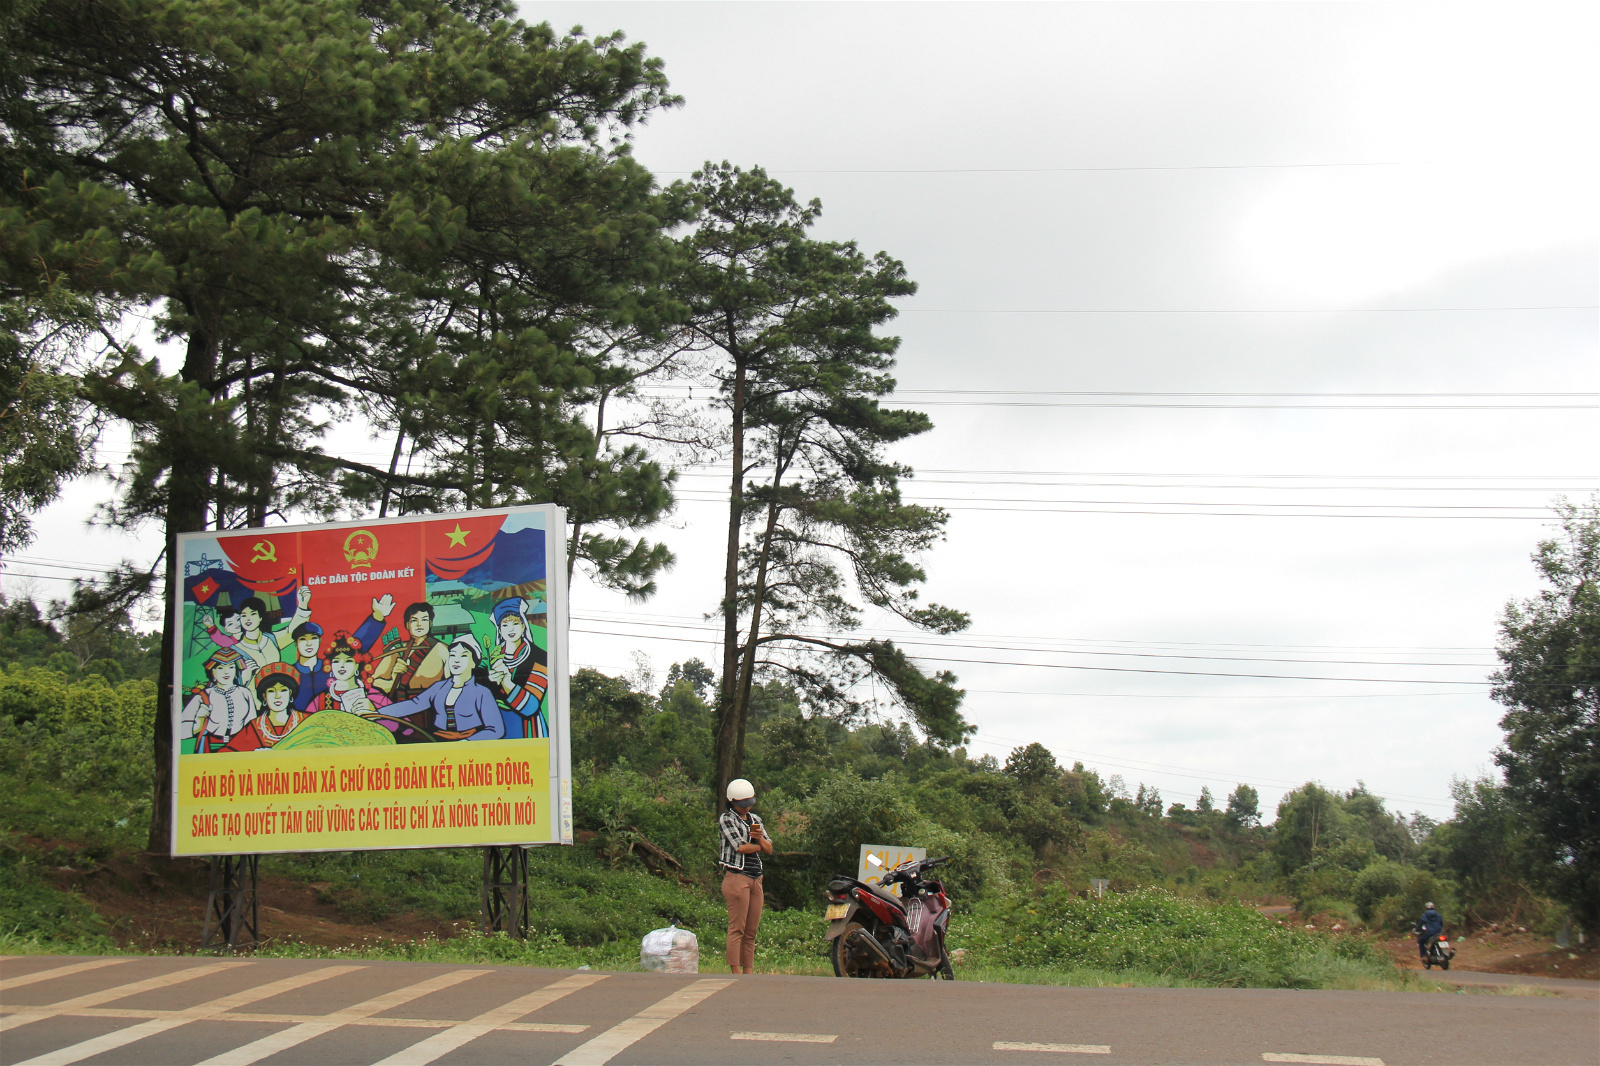 Propaganda posters in Vietnam promoting the development of the countryside